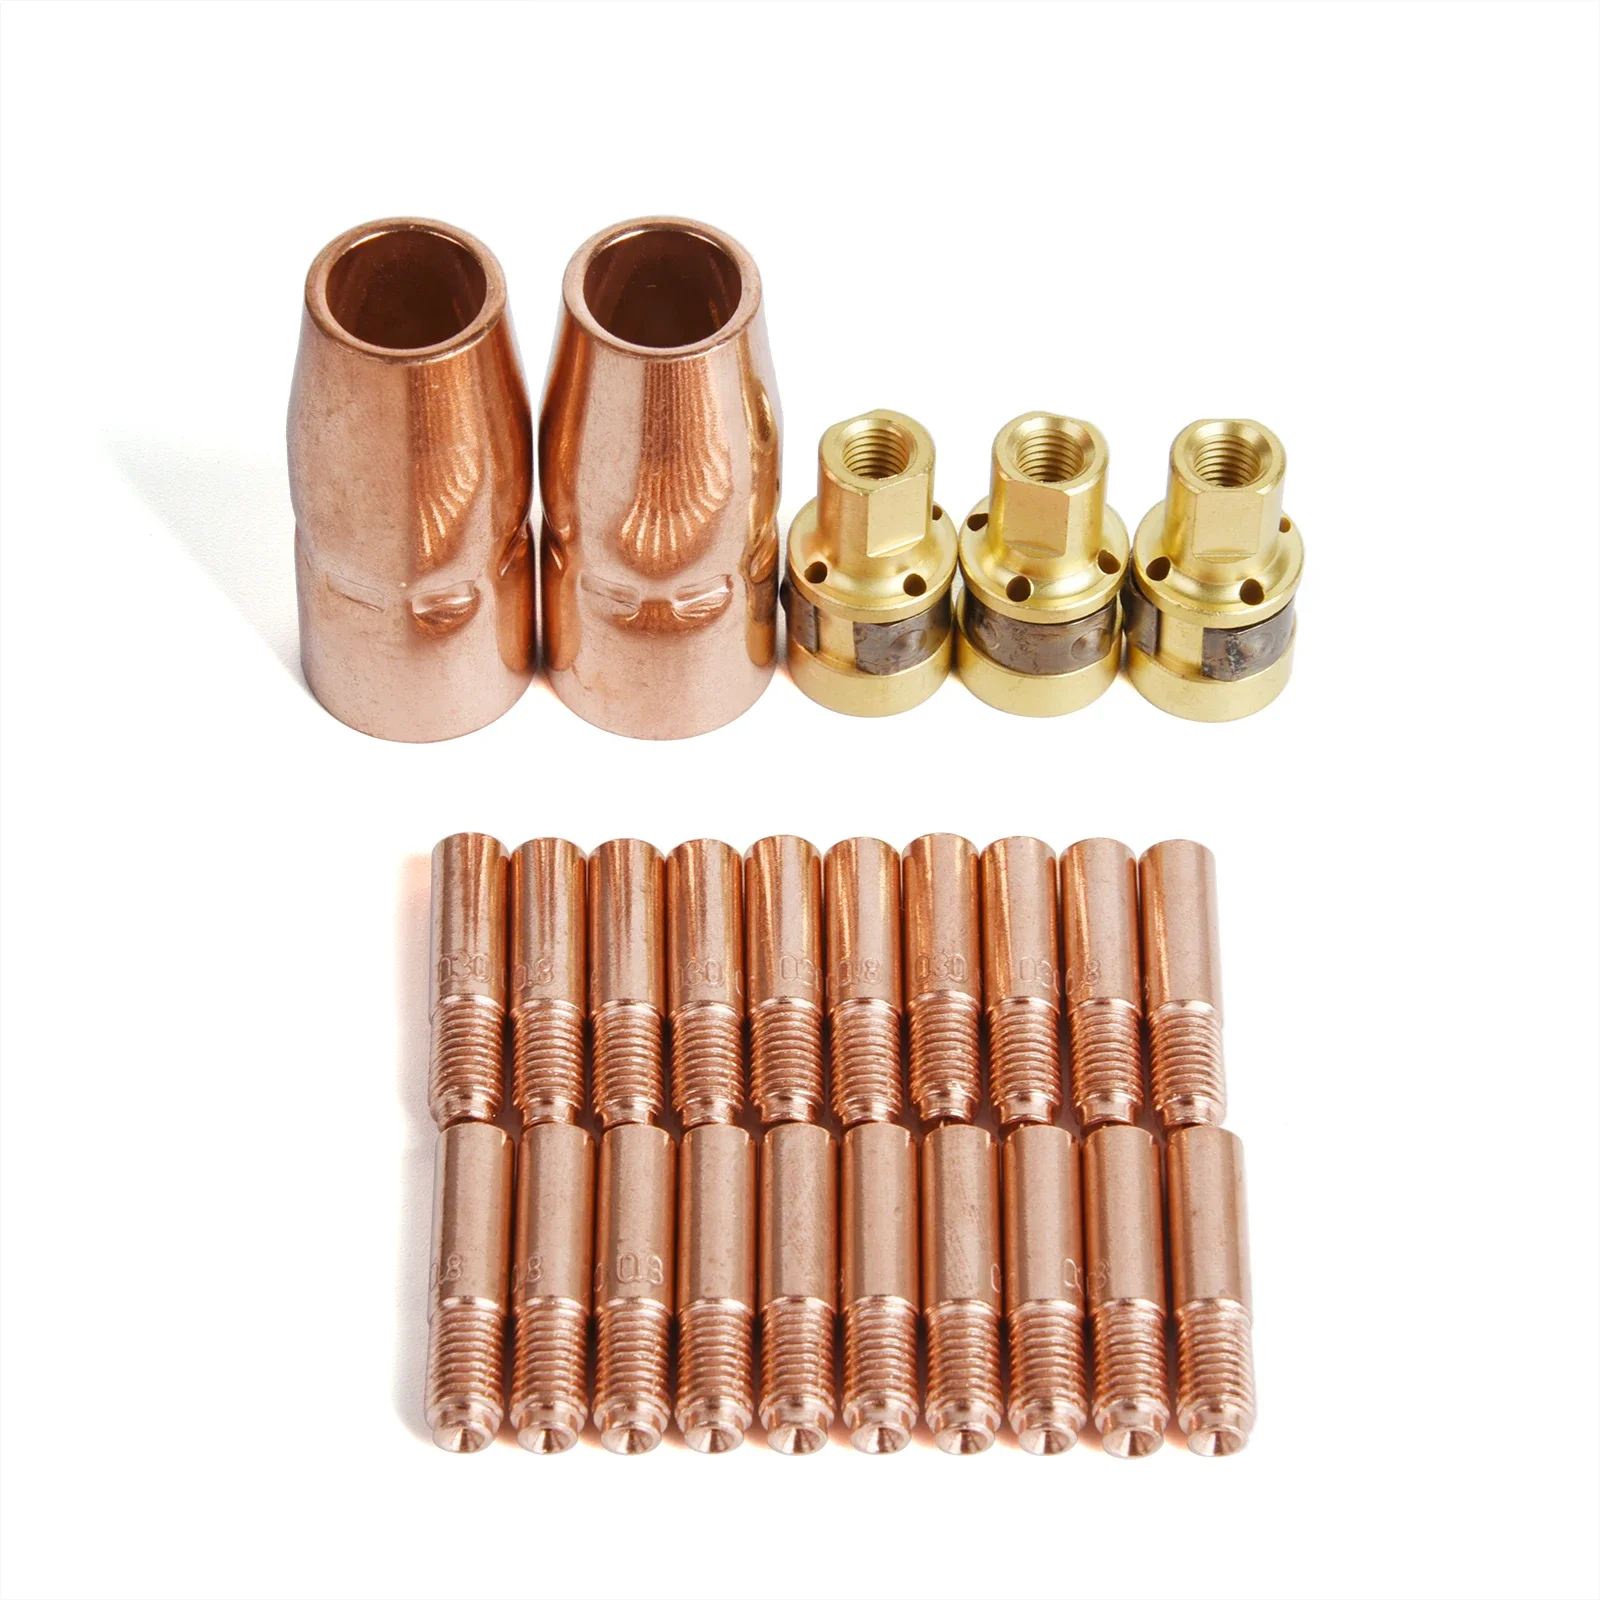 

25/50Pcs Mig Welding Torch Consumables 0.6/0.8/0.9/1.2mm MIG Torch Gas Nozzle Tip Holder Fit Miller M-10, M-15 Hobart H-9,H-10